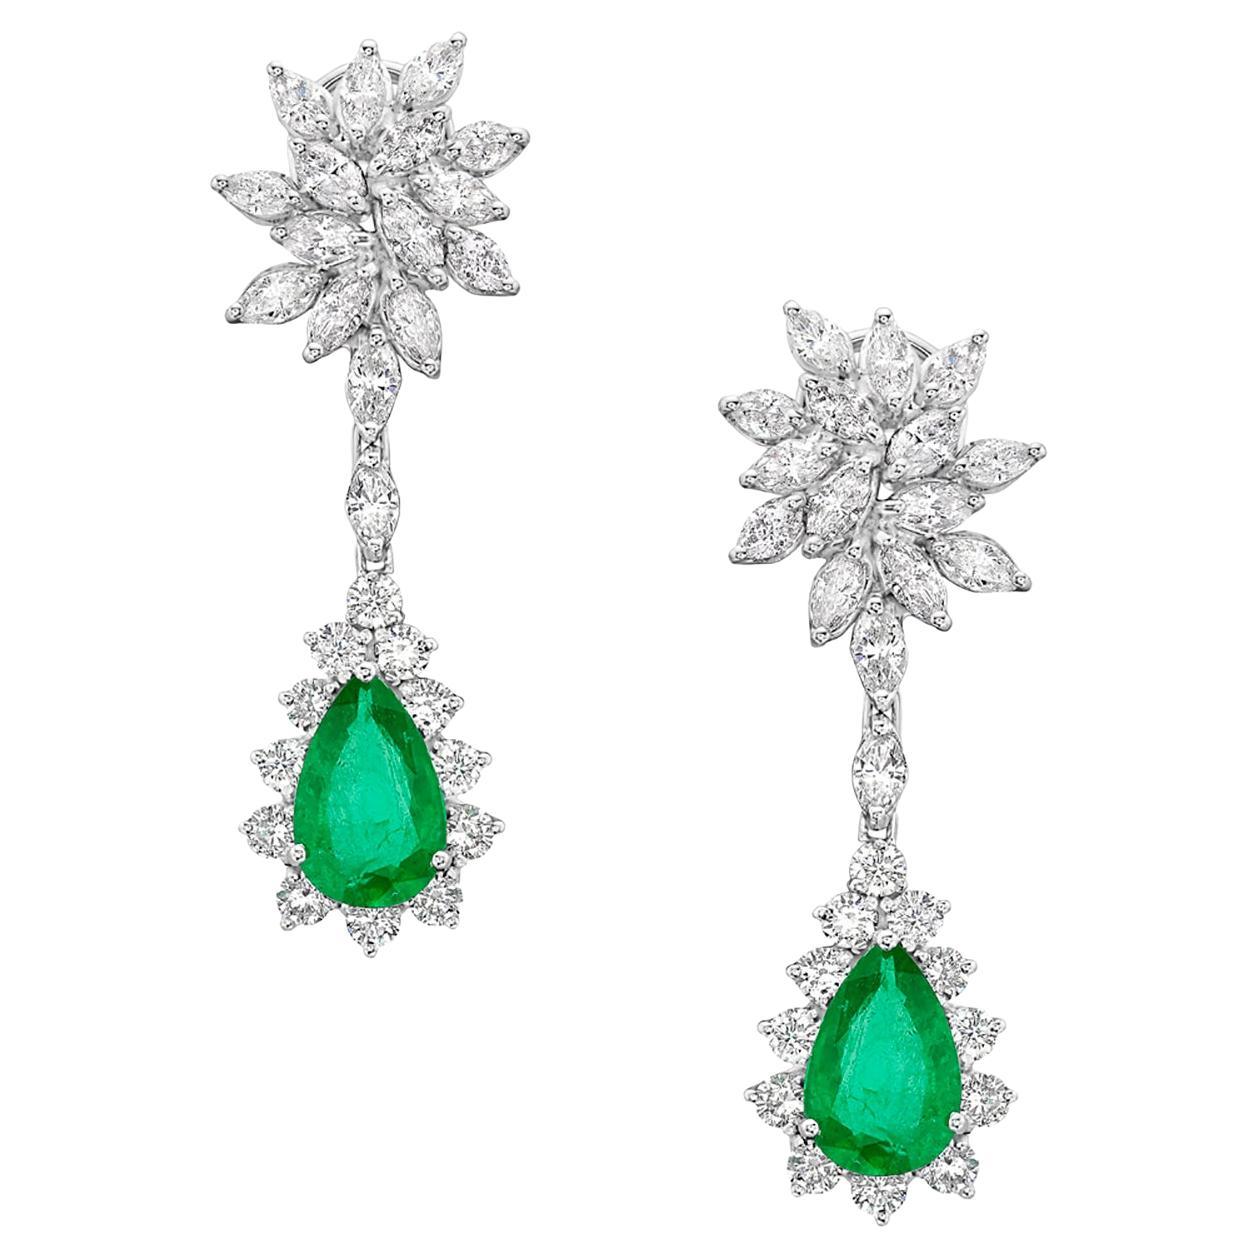 Starburst Earrings with Pear Shaped Emerald & VS Diamonds in 18k White Gold For Sale